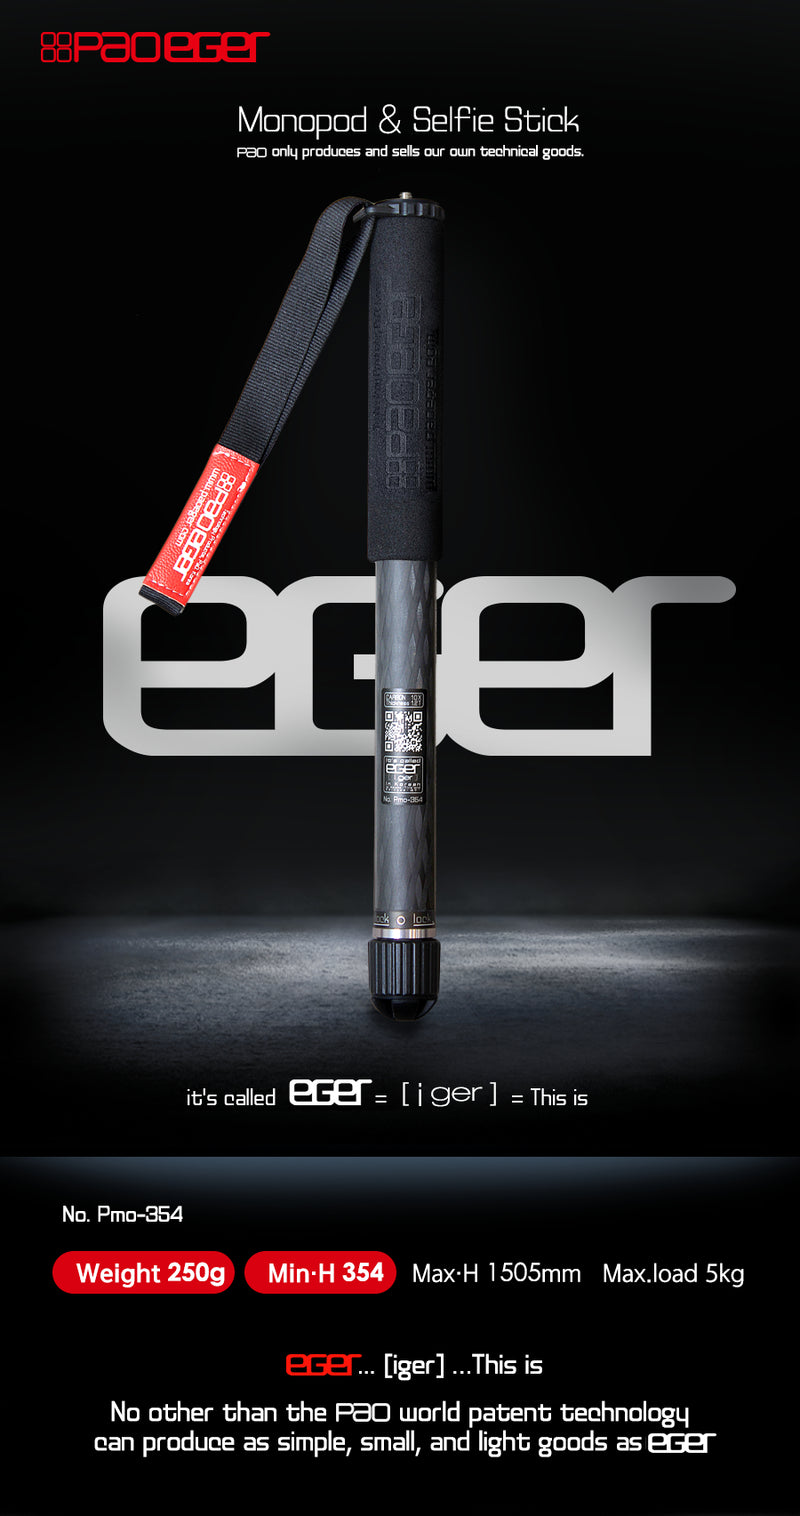 Pao monopod, Paoeger  No. Pmo-354, Weight 250g, Min.H 354mm, Max.H 1505mm, Max.load 5kg, Carbon pipe(10X)